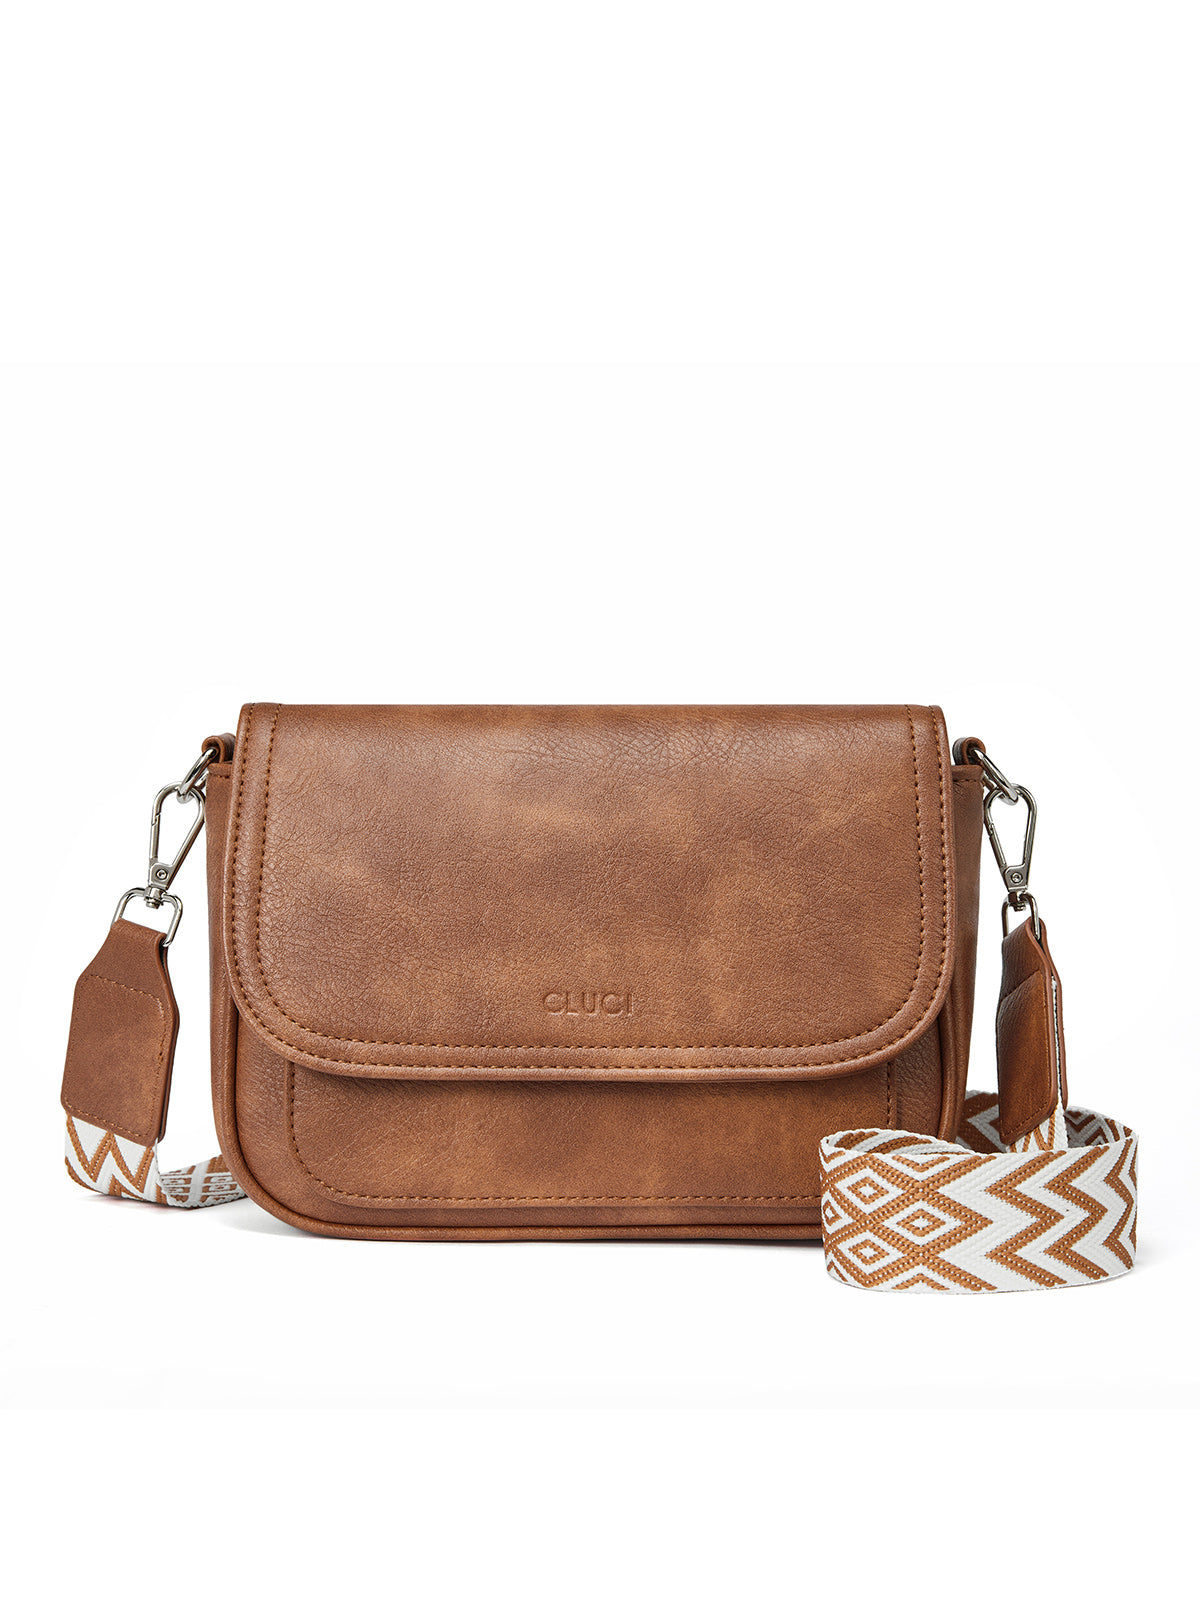 CLUCI Small Crossbody Bags for Women Trendy Purses